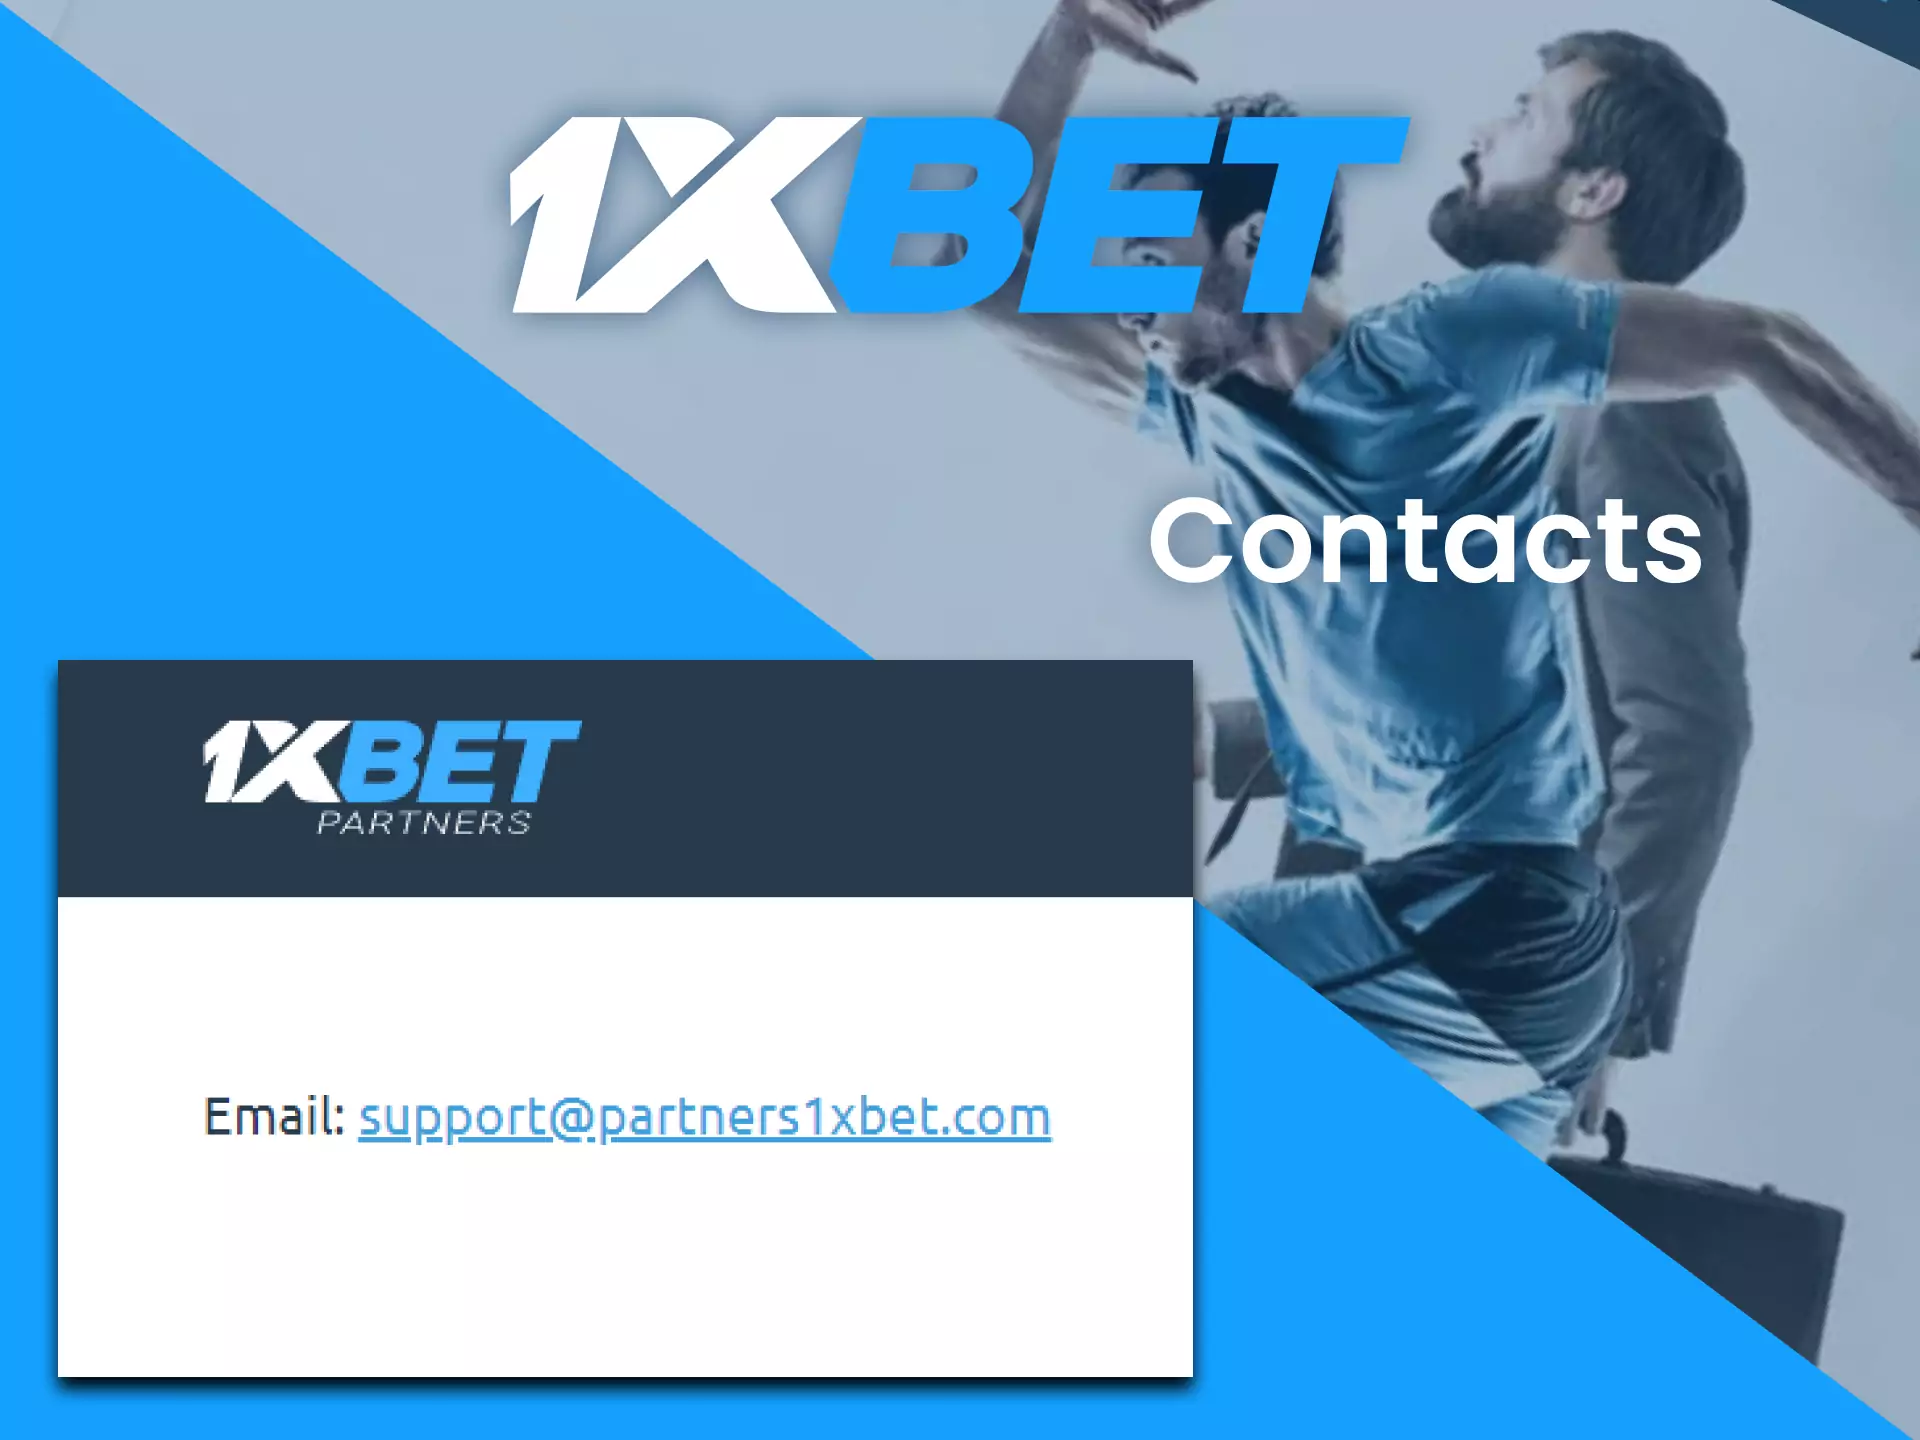 Contact 1xbet online support if you have questions about the affiliate club.